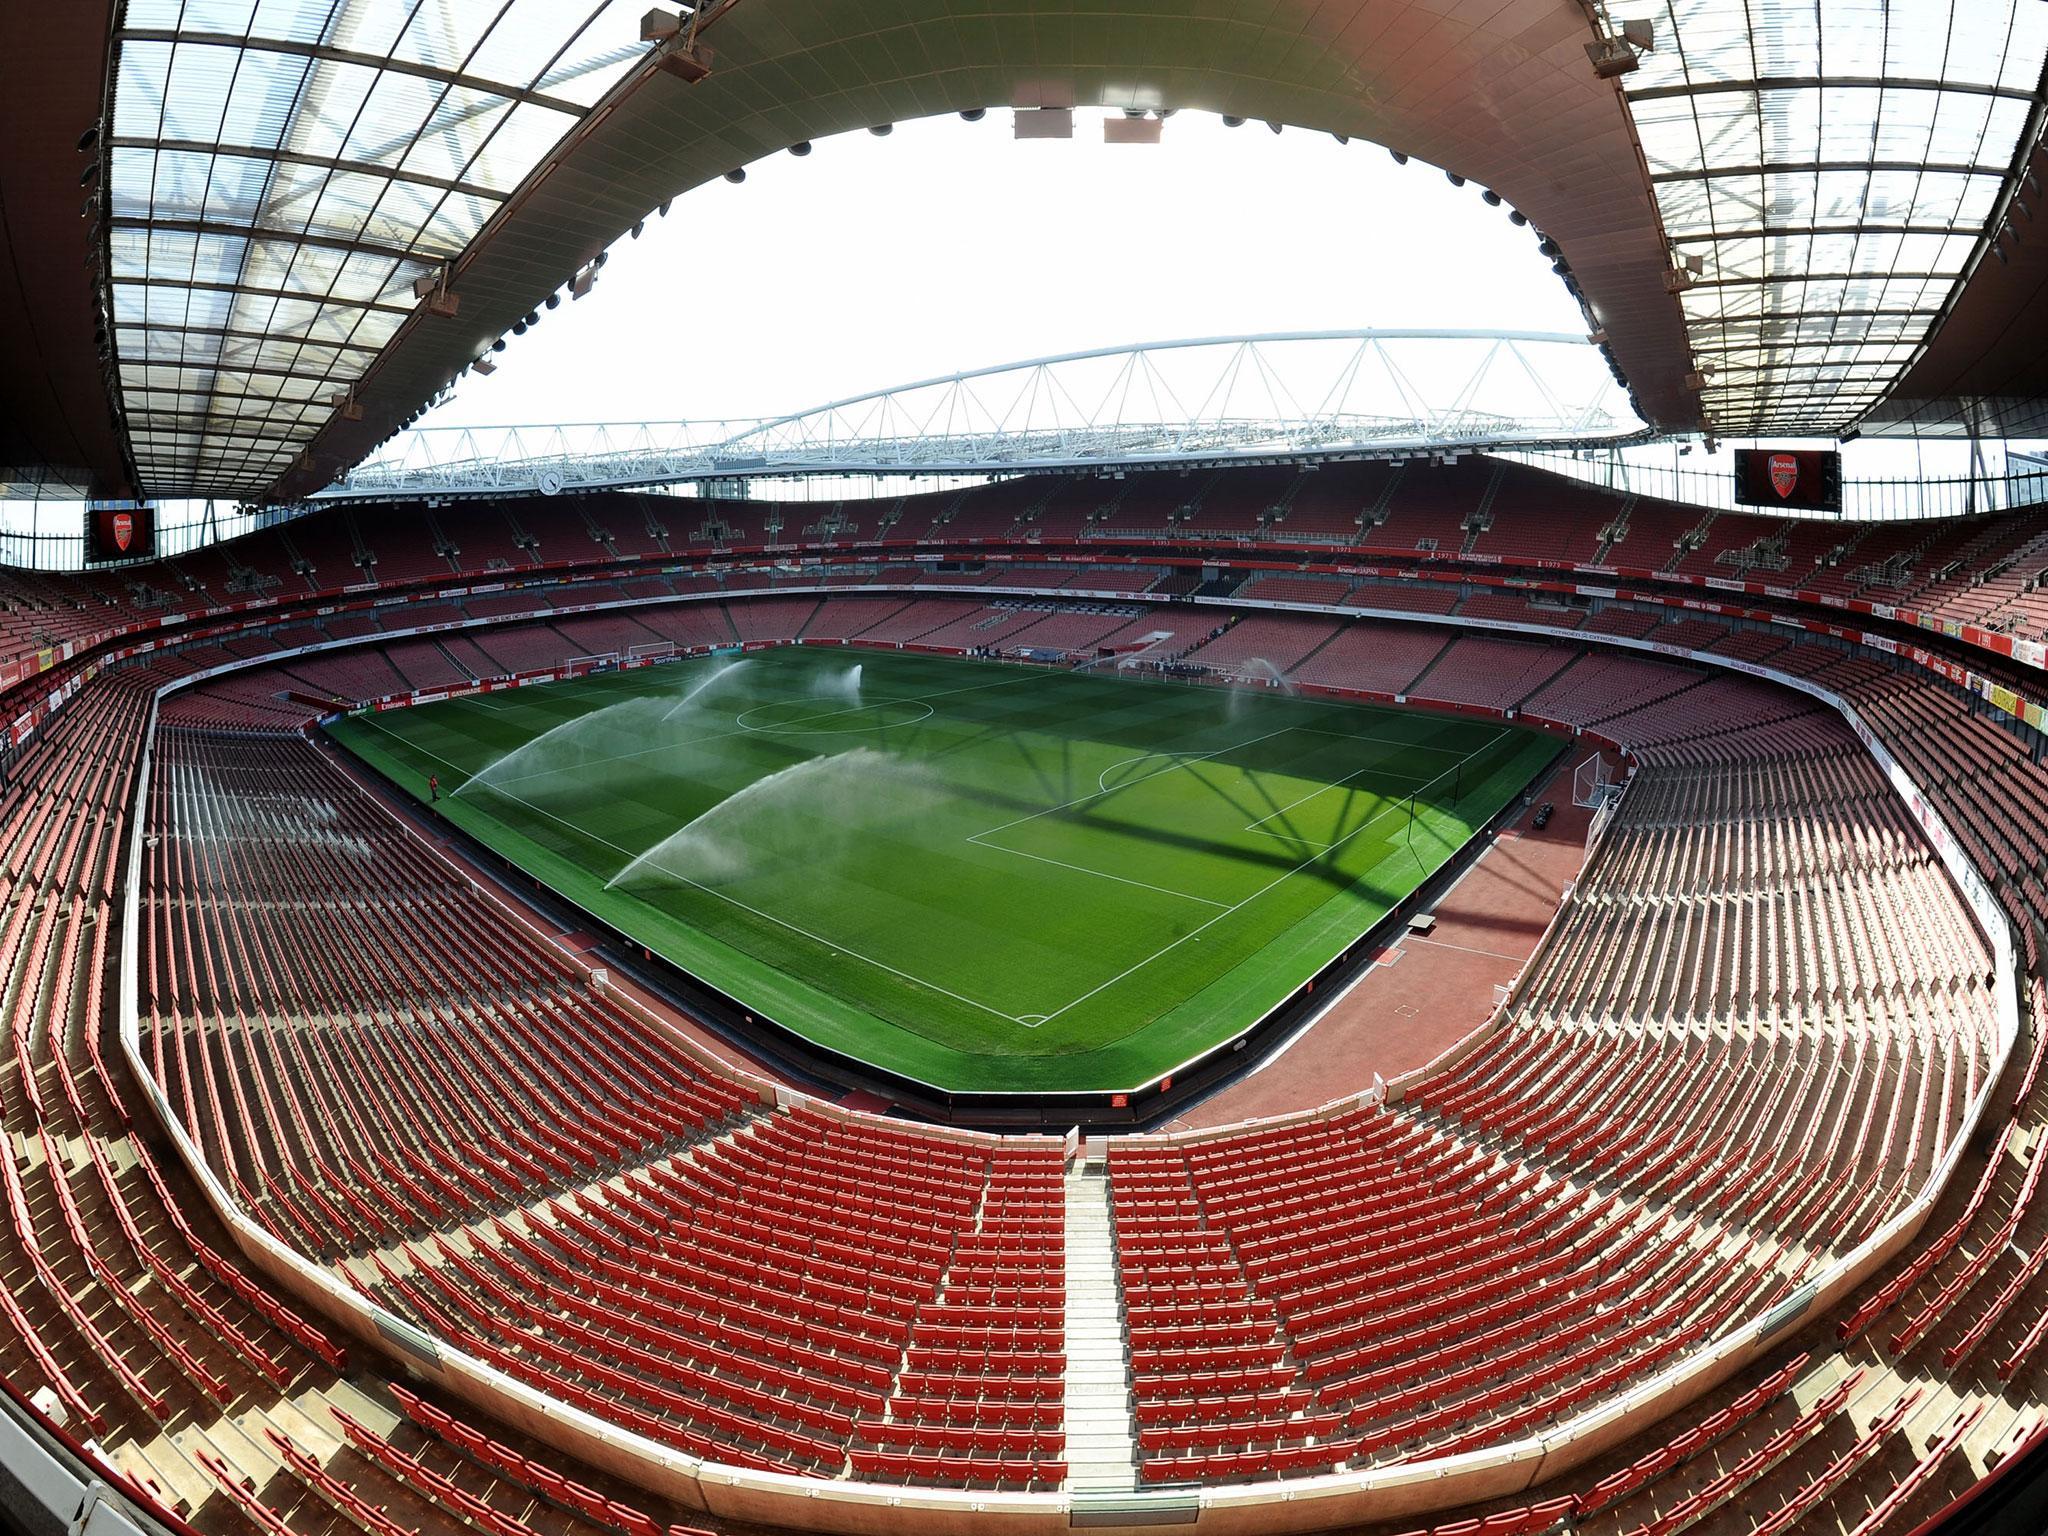 Arsenal are set to increase the capacity of the Emirates